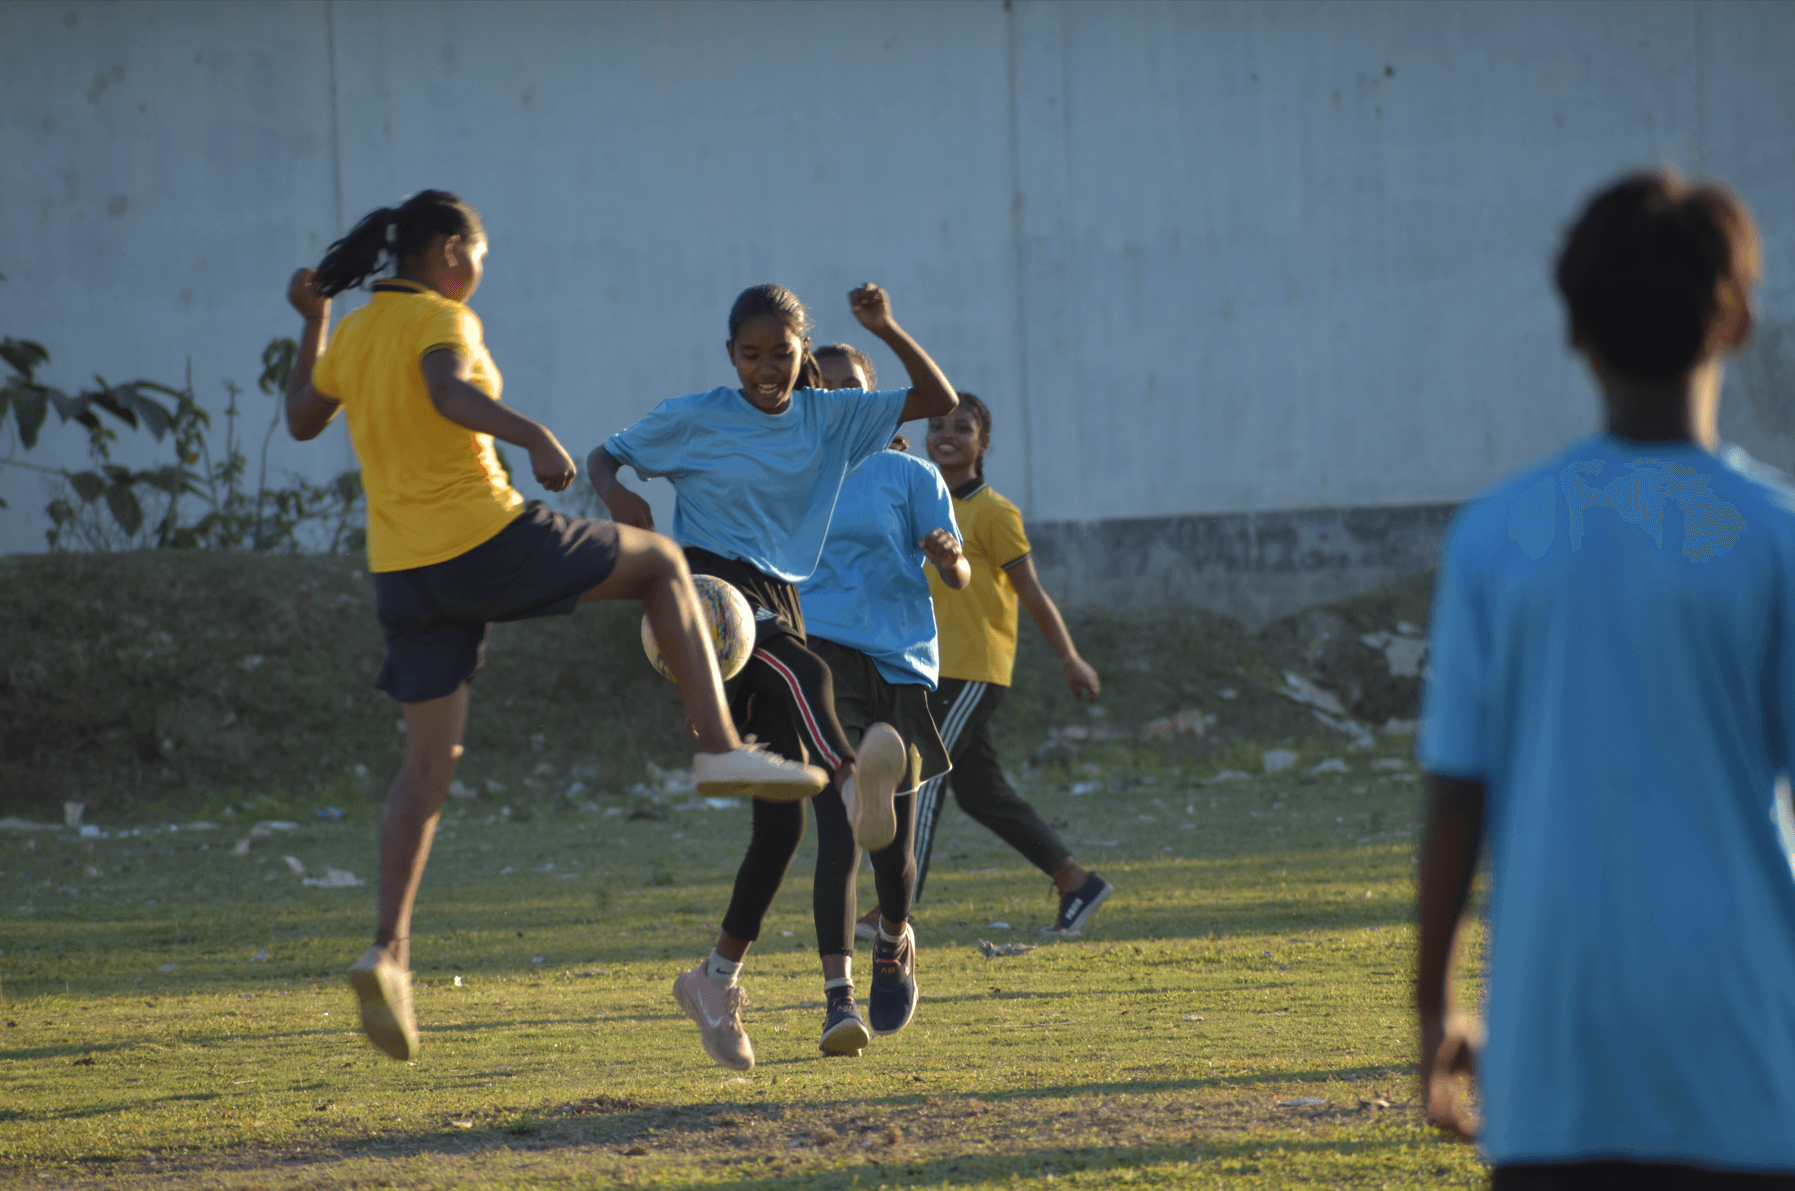 Girls involved in WSAF as change leaders play football, India. Image: ETP